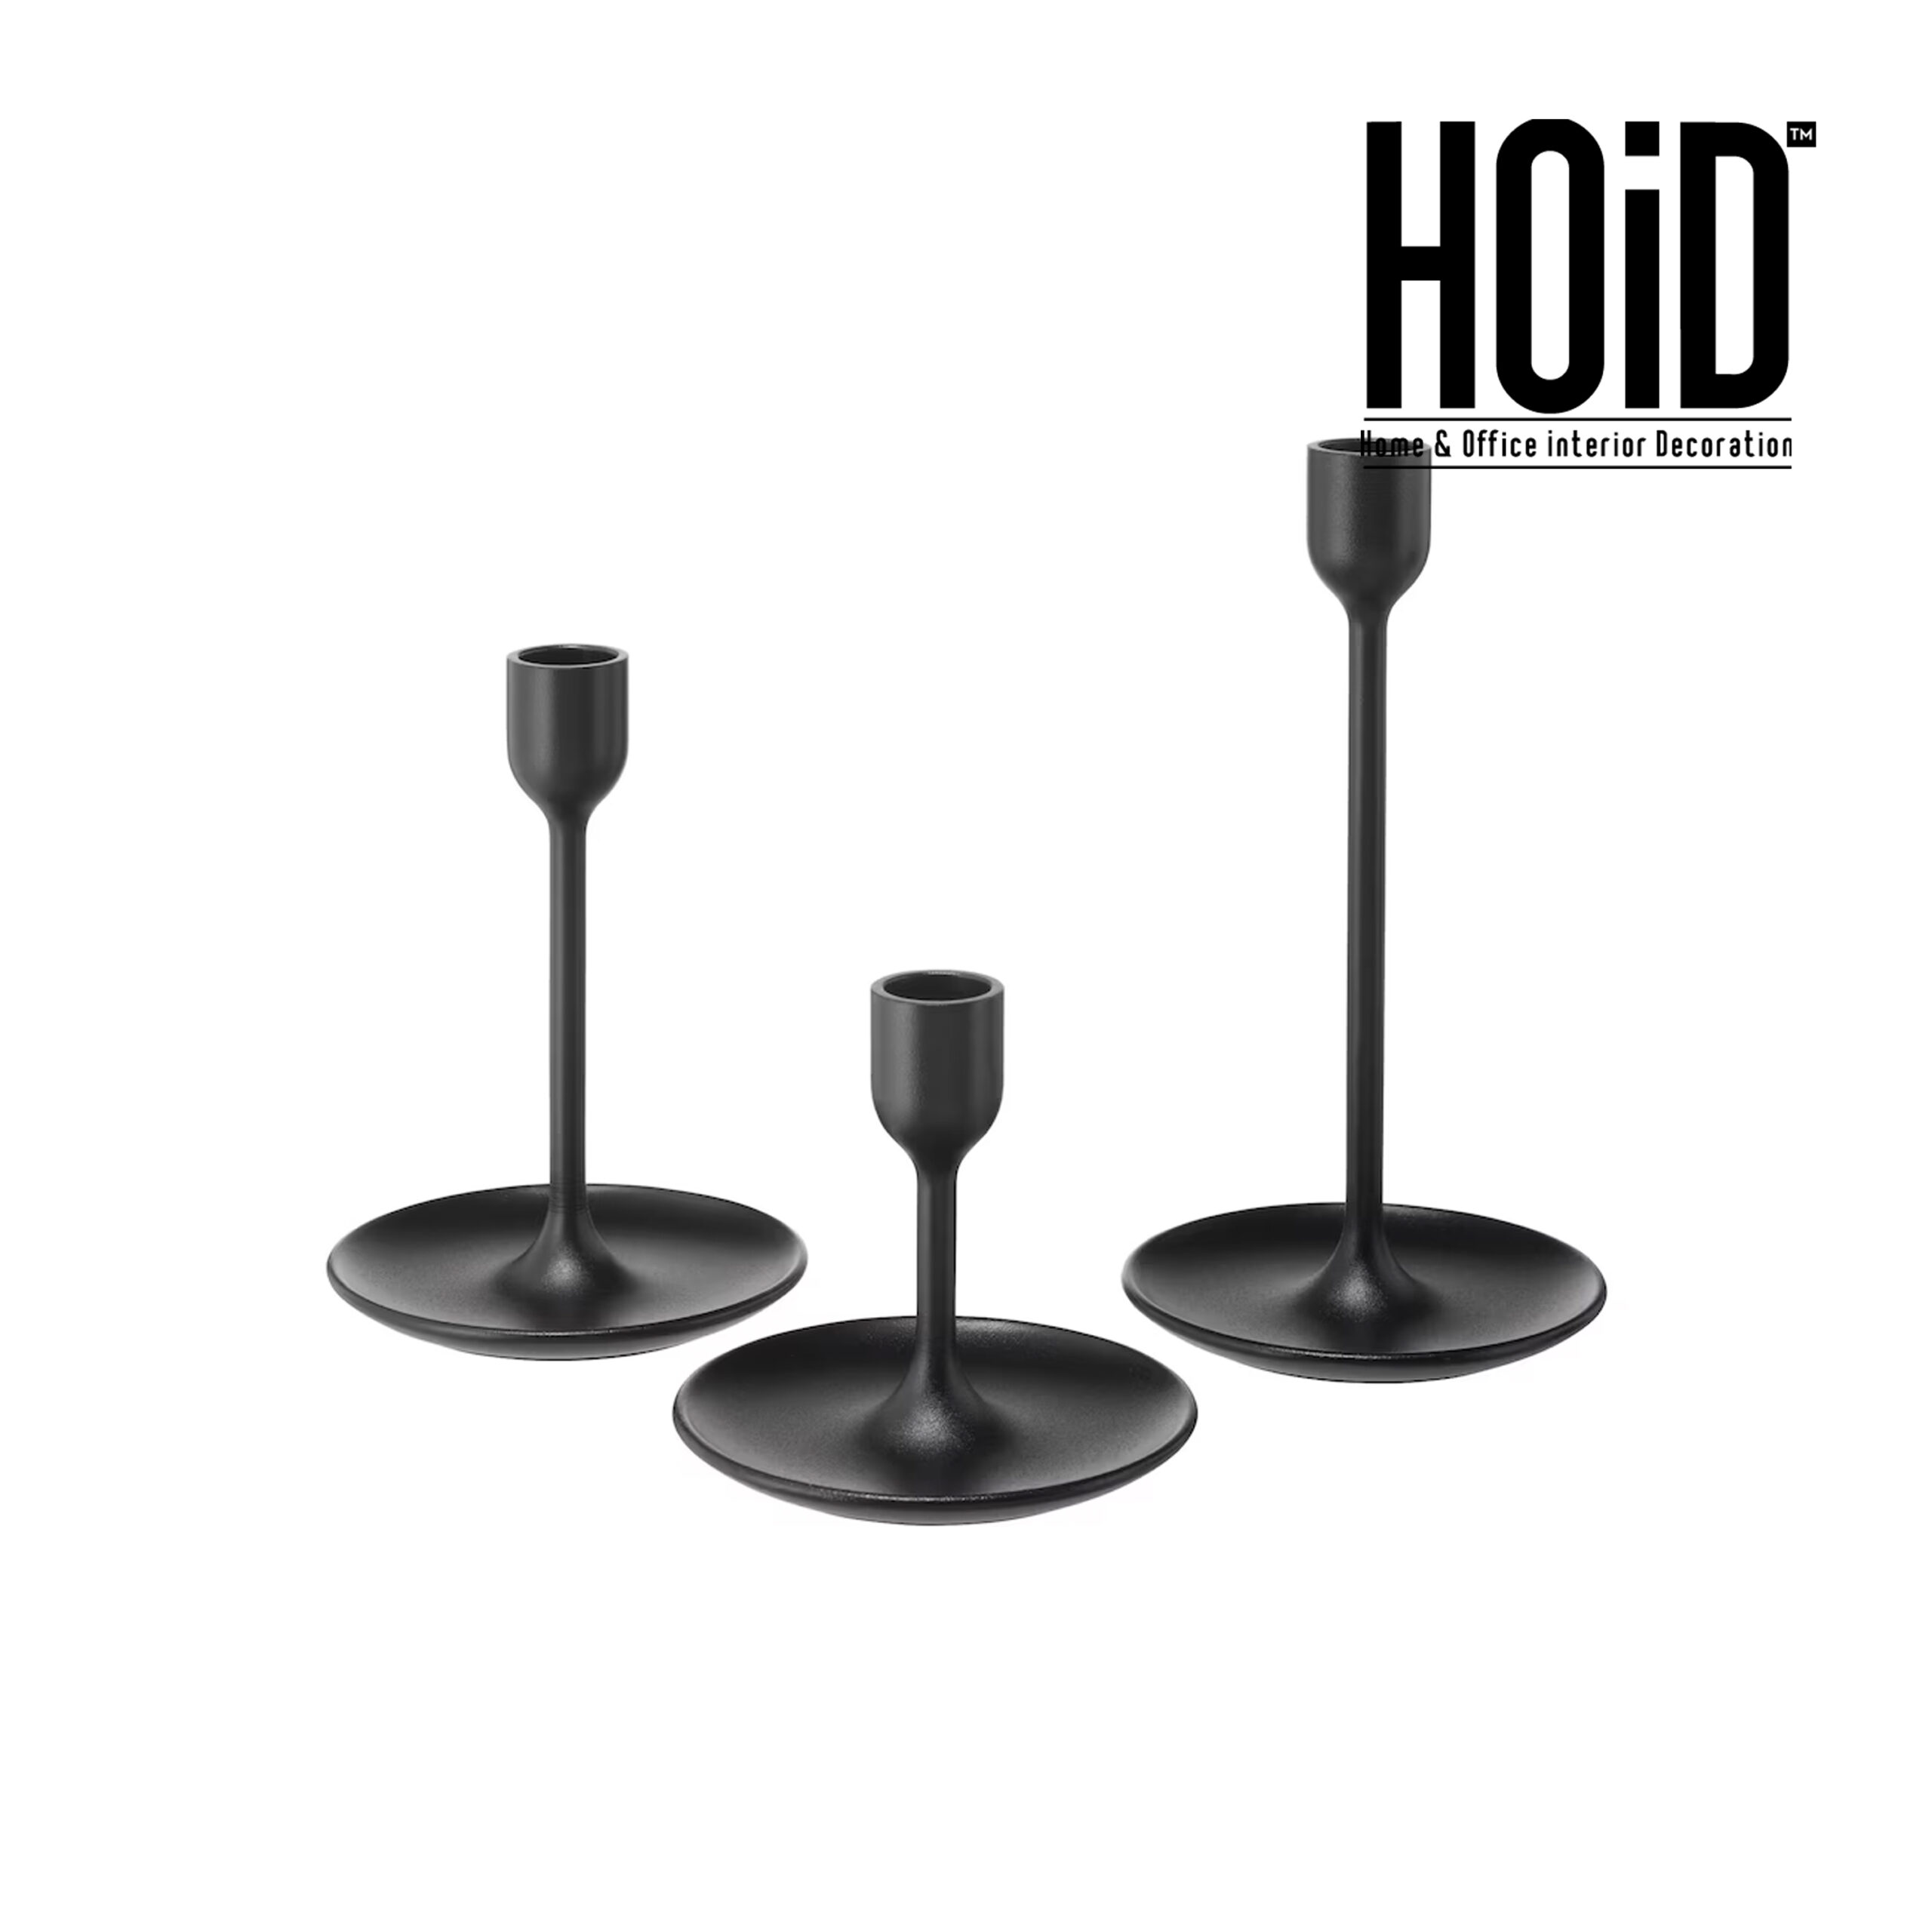 Fun-set-of-3-candle-stands-scaled-2.jpg